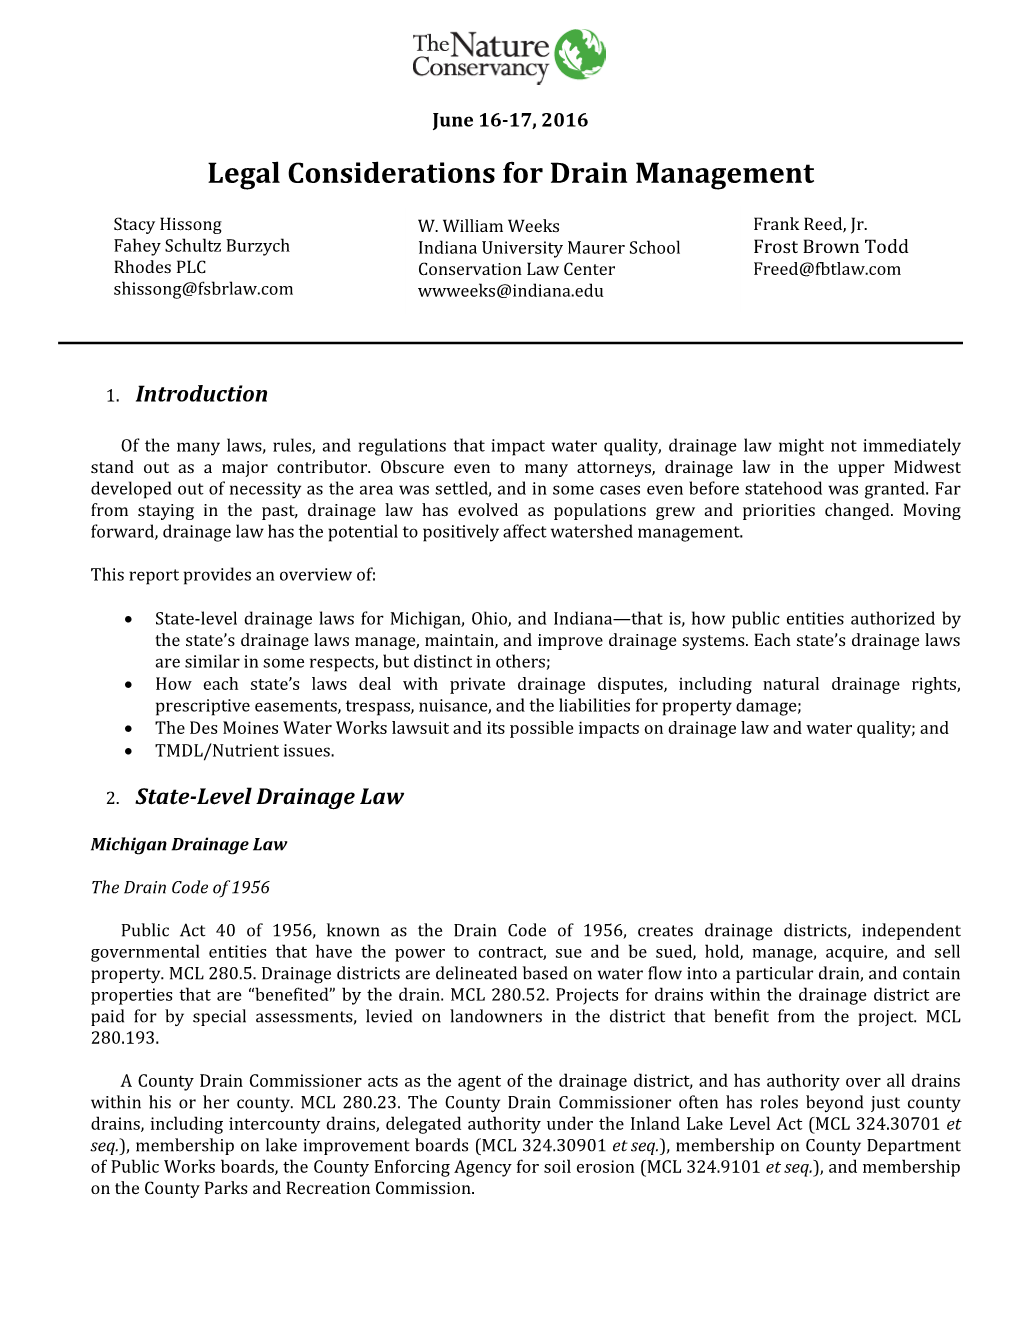 Legal Considerations for Drain Management